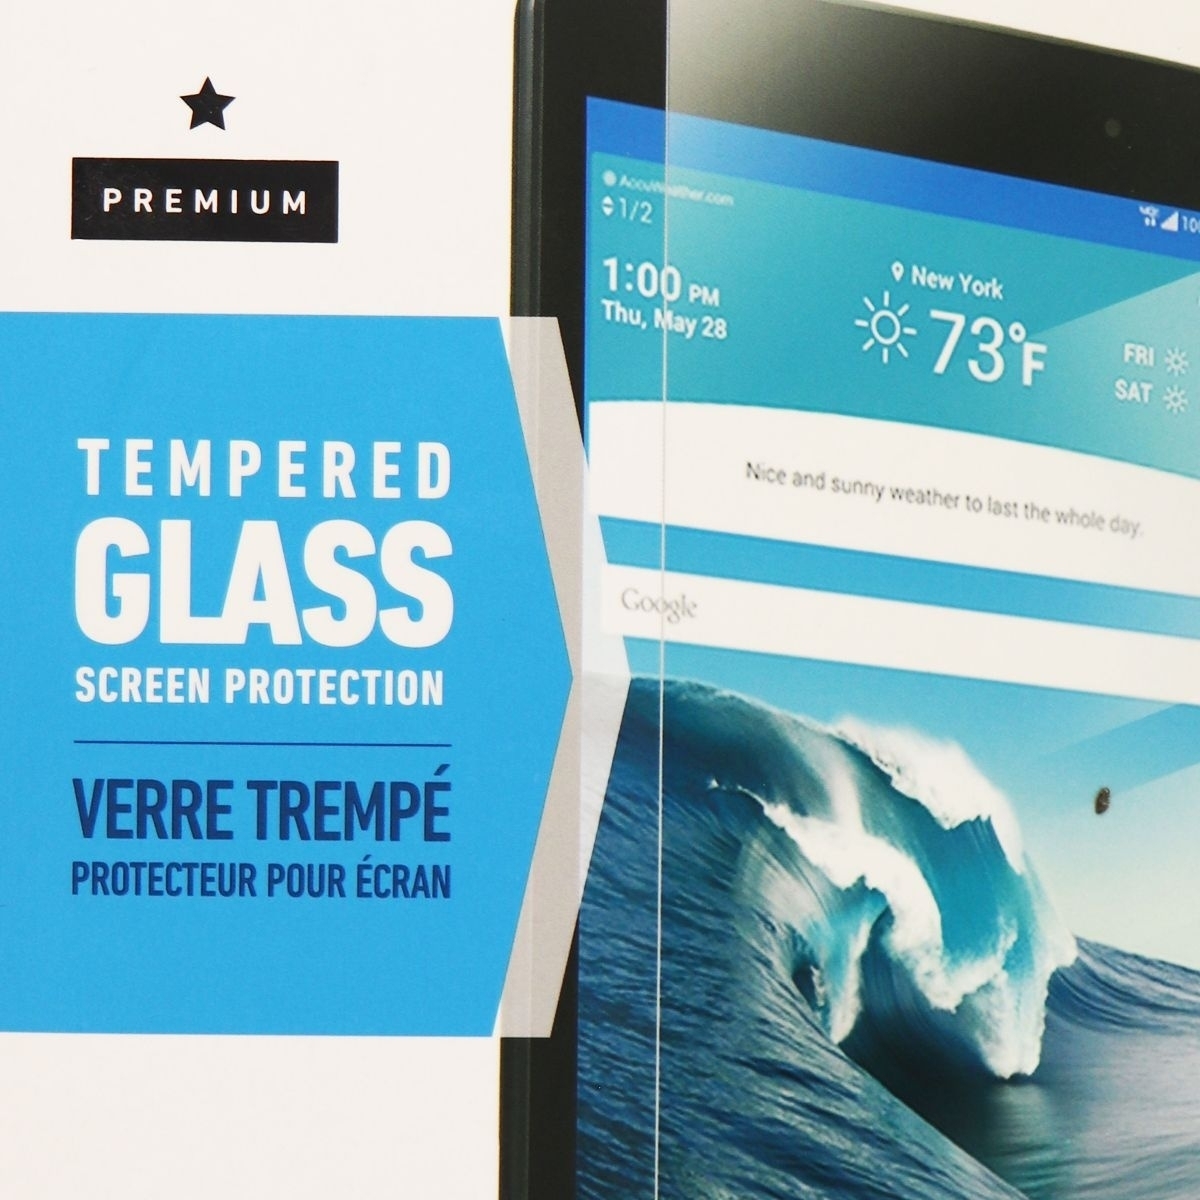 BodyGuardz Pure Series Premium Tempered Glass For LG G Pad X 8.0 - Clear